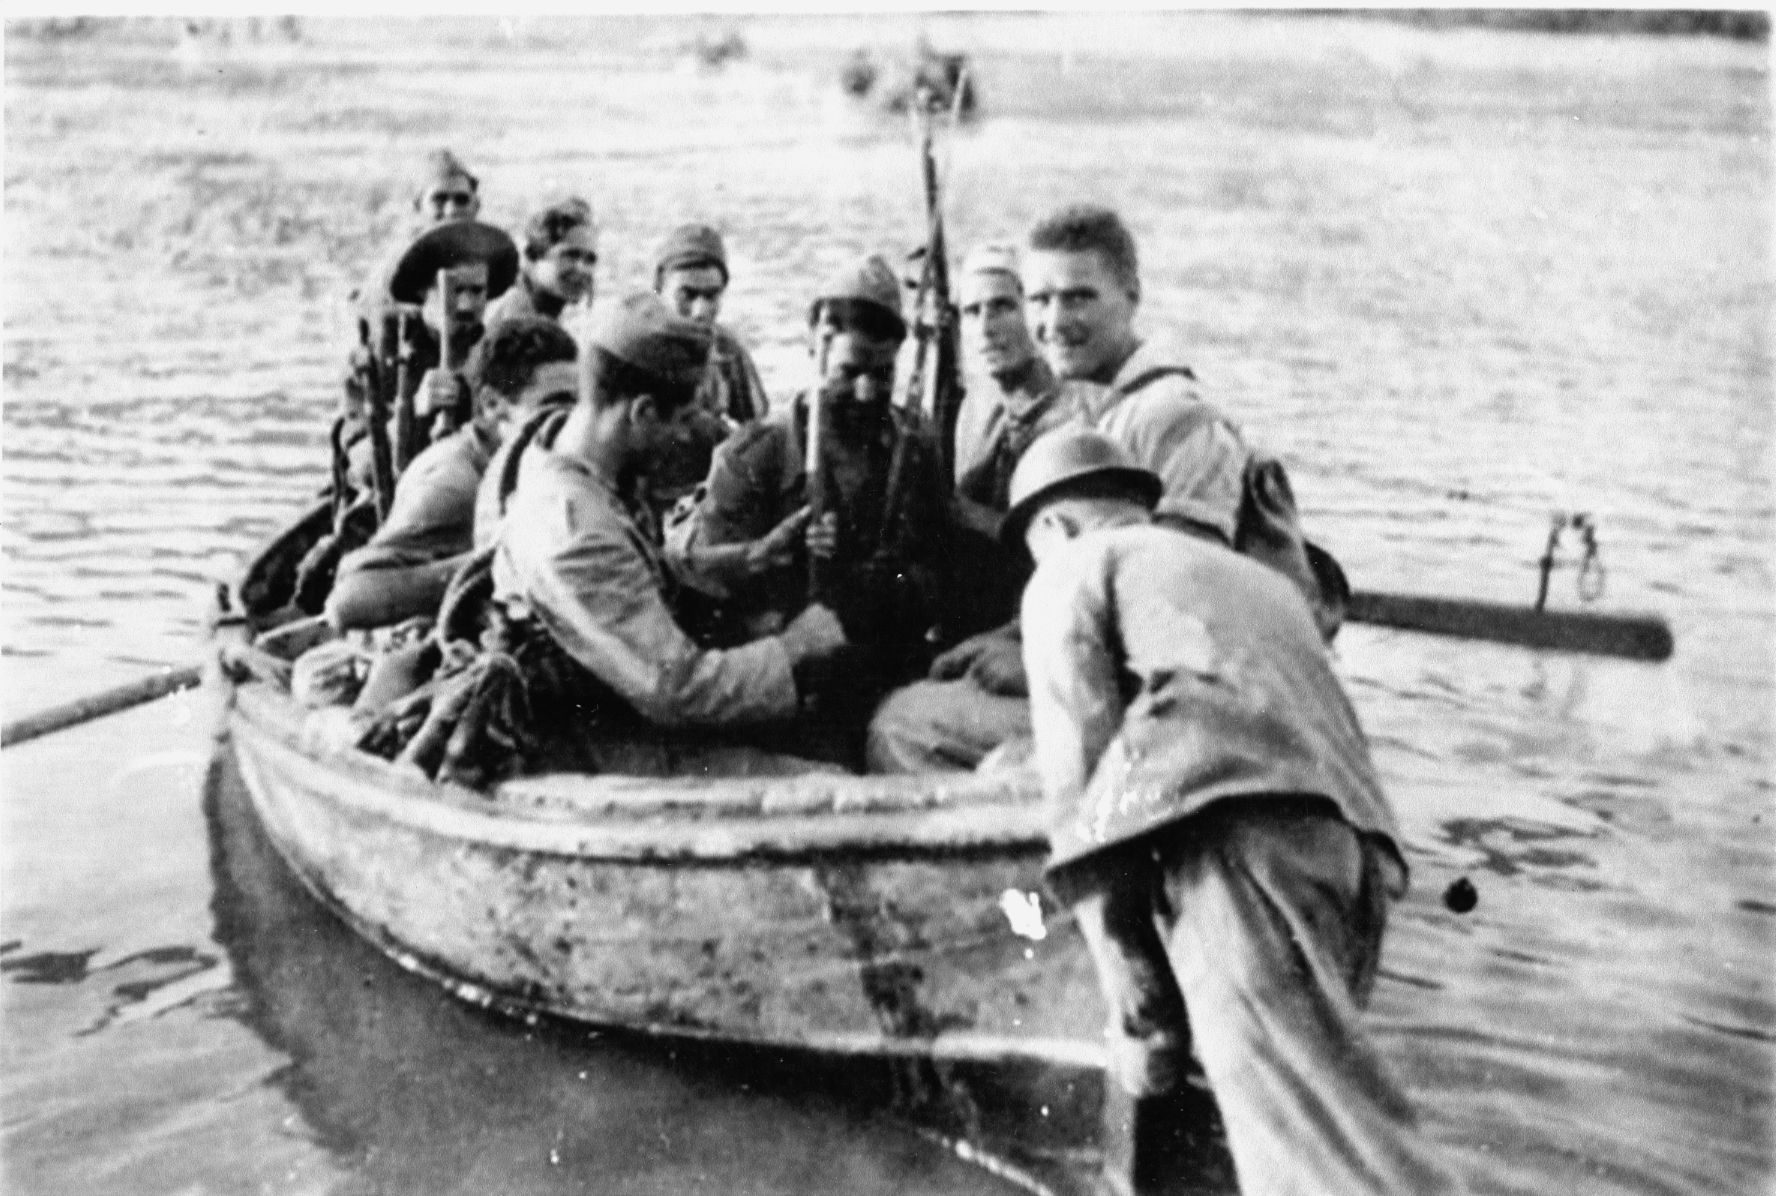 Mac Paps cross the Ebro River at the start of their ill-fated last offensive.